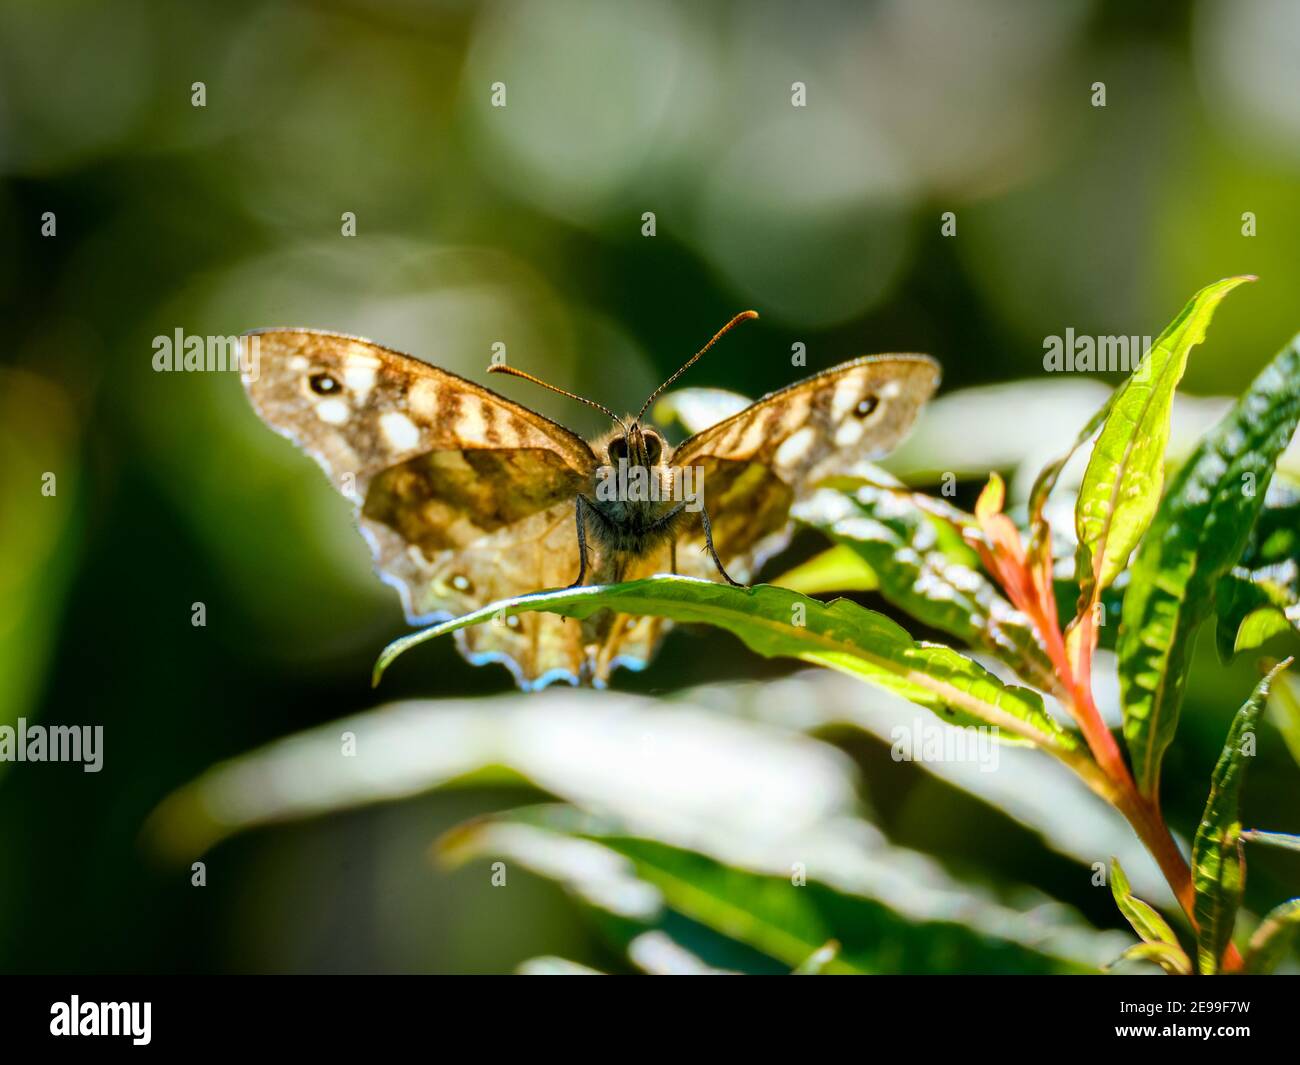 Butterfly. Speckled Wood (Pararge aegeria) view from the underwing. Seen in woodlands, gardens and hedgerows throughtout much of the UK. Stock Photo